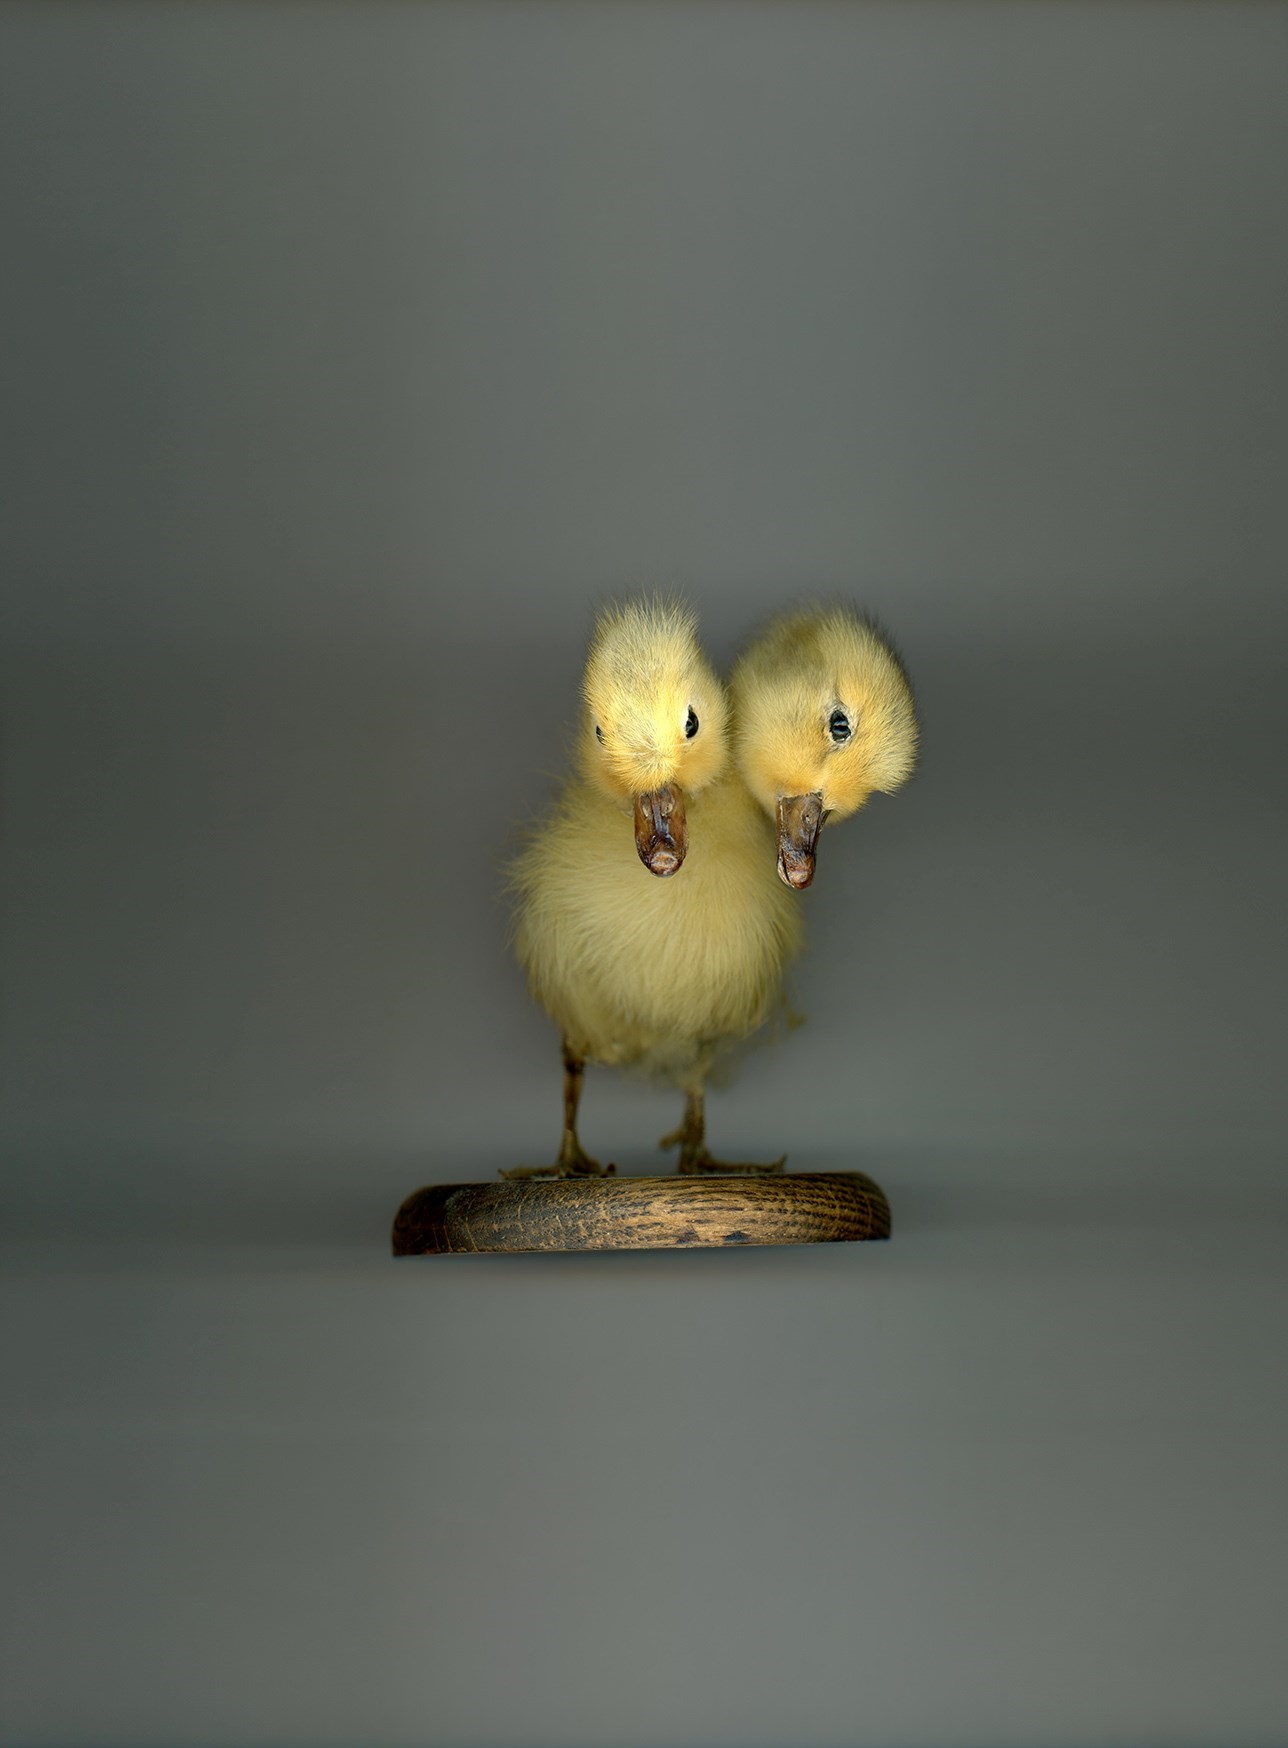 62 - TWO-HEADED CHICK